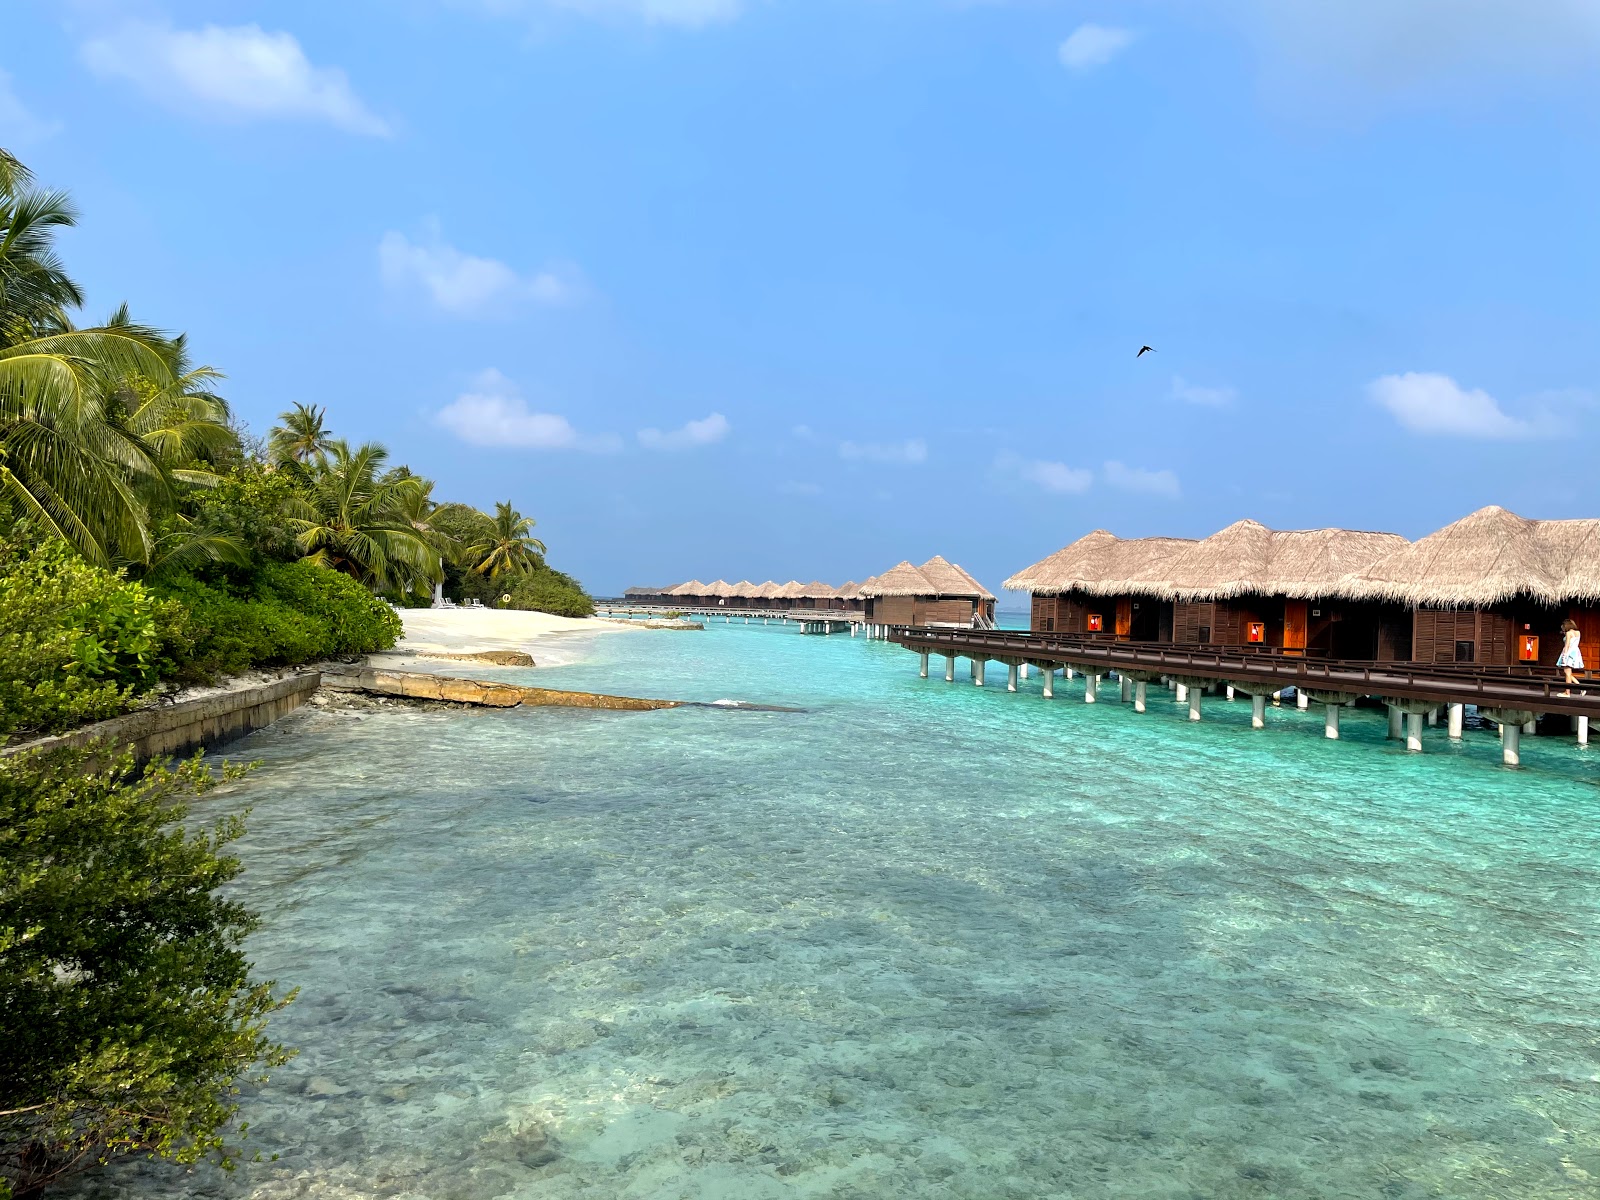 Photo of Sheraton Resort Island - popular place among relax connoisseurs